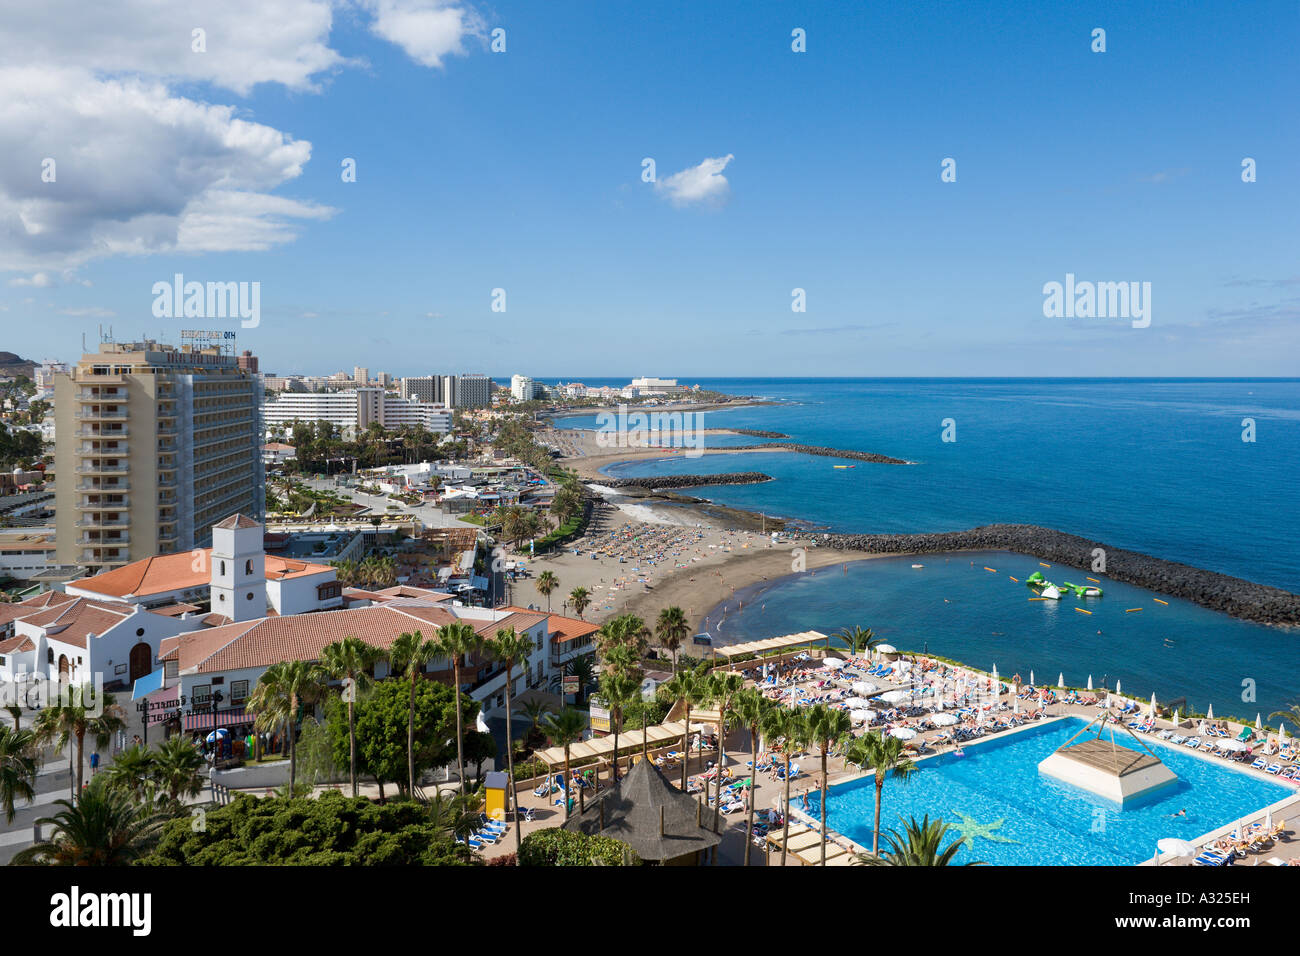 Playa De Las Americas High Resolution Stock Photography and Images - Alamy